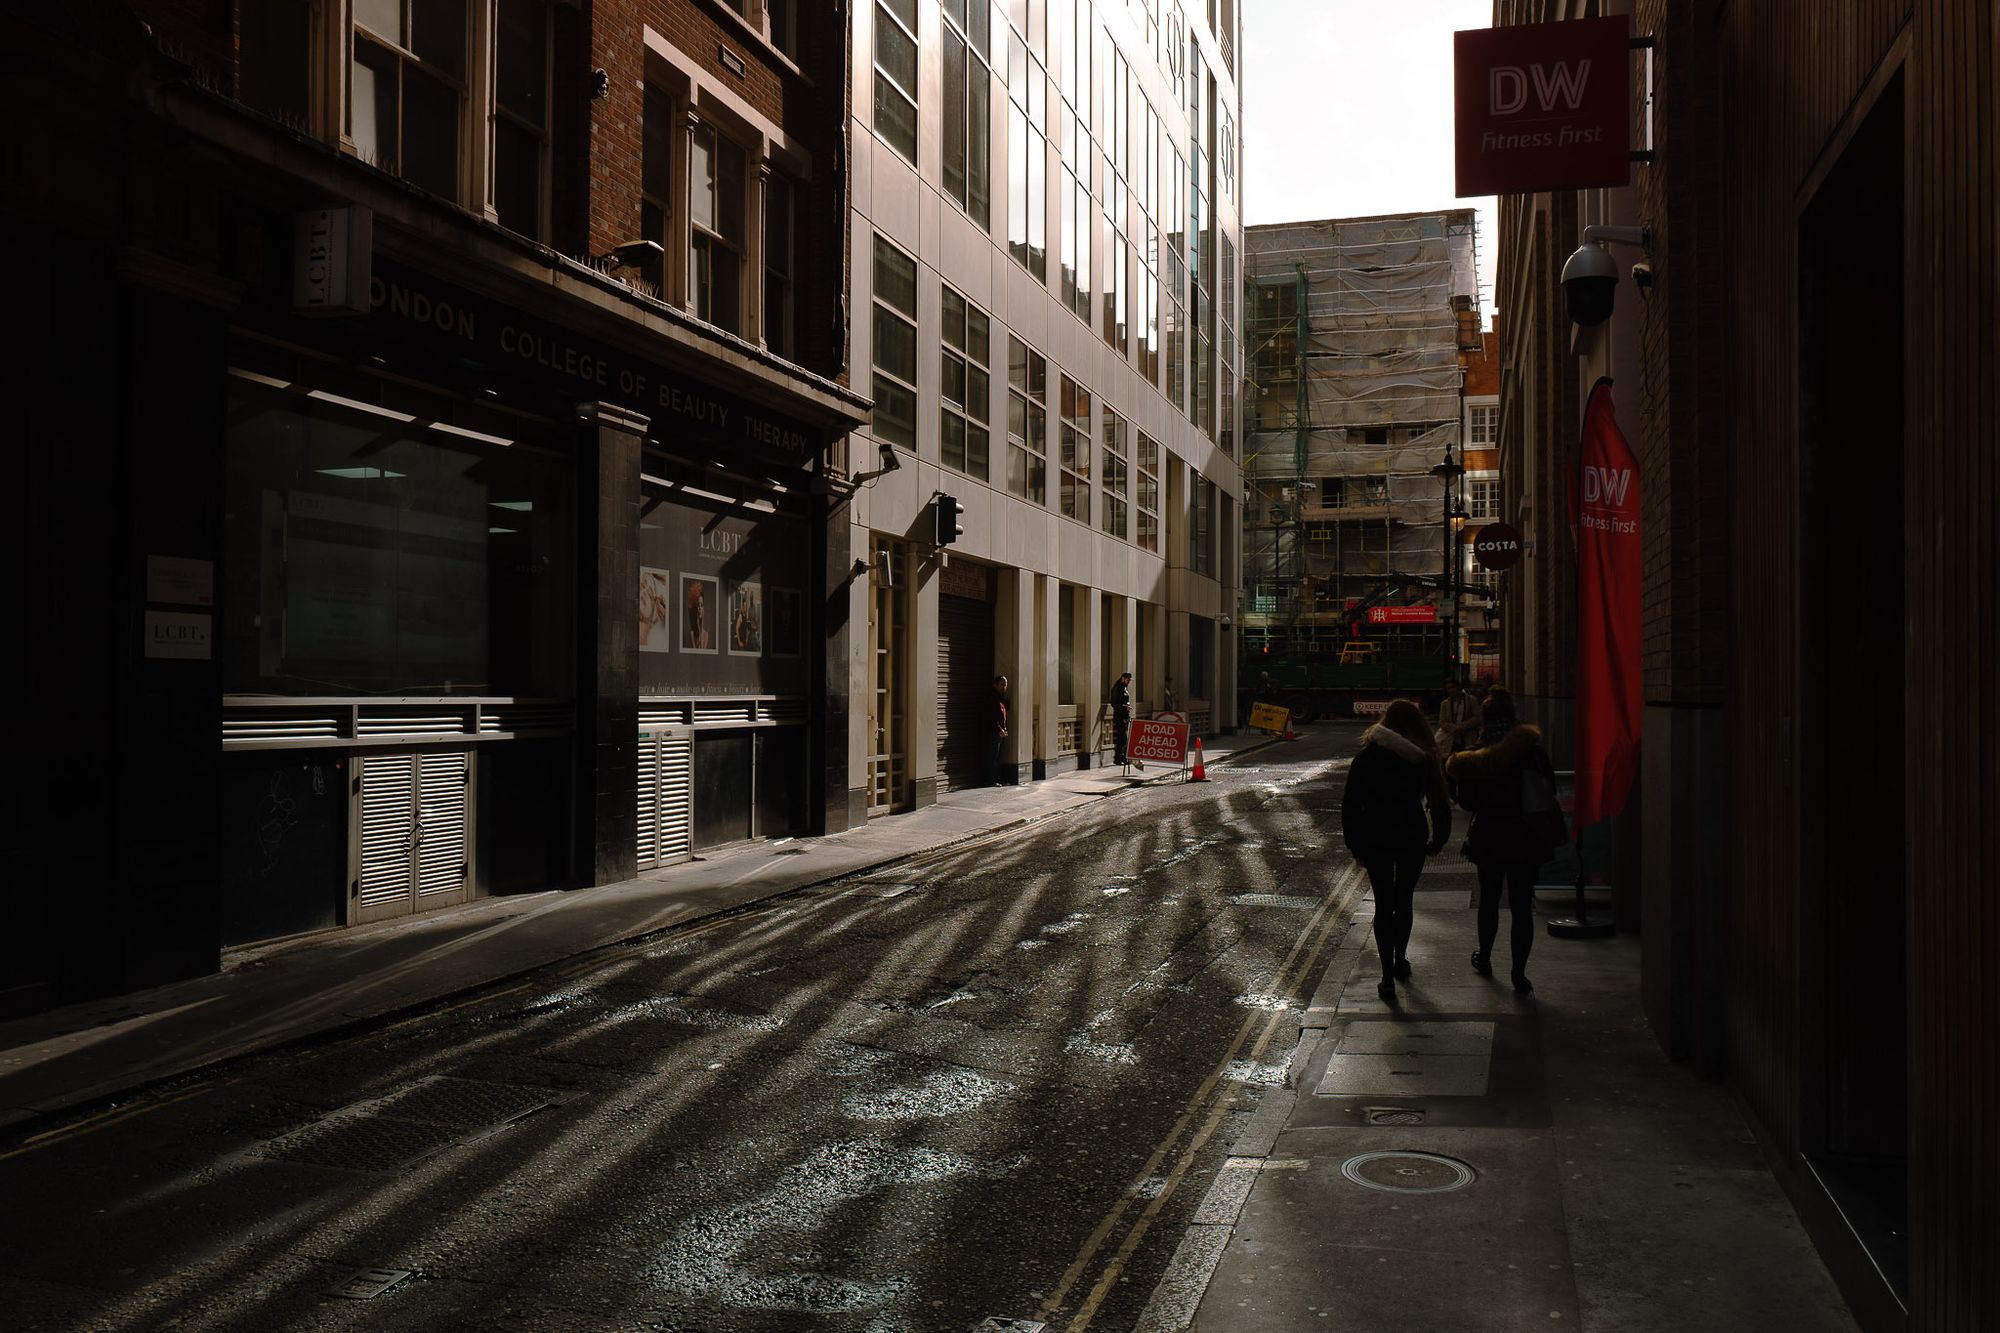 A view down a side-street where the light is bouncing off the windows of a tall building scattering reflections on the street.